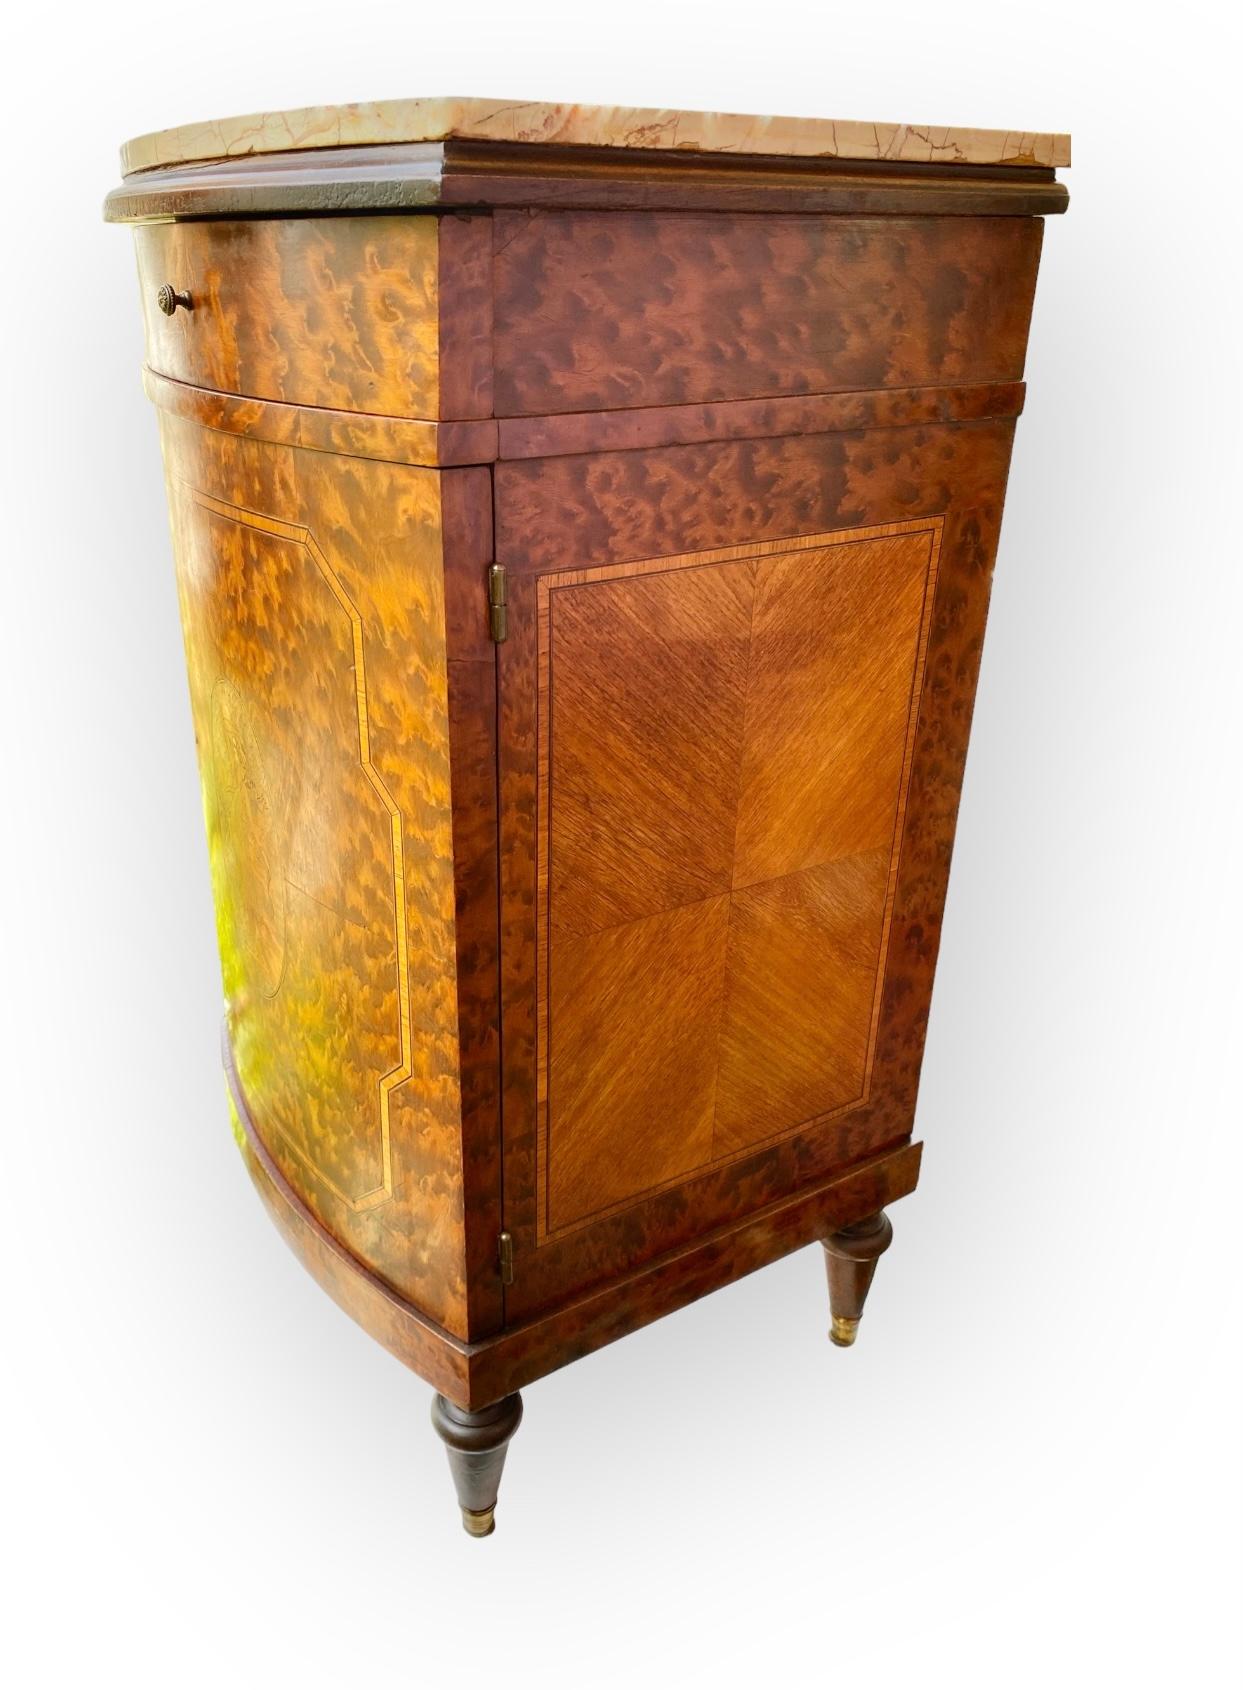 French Beaux Arts Inlaid Marquetry Burl Walnut Side Cabinet With Marble Tops  For Sale 3